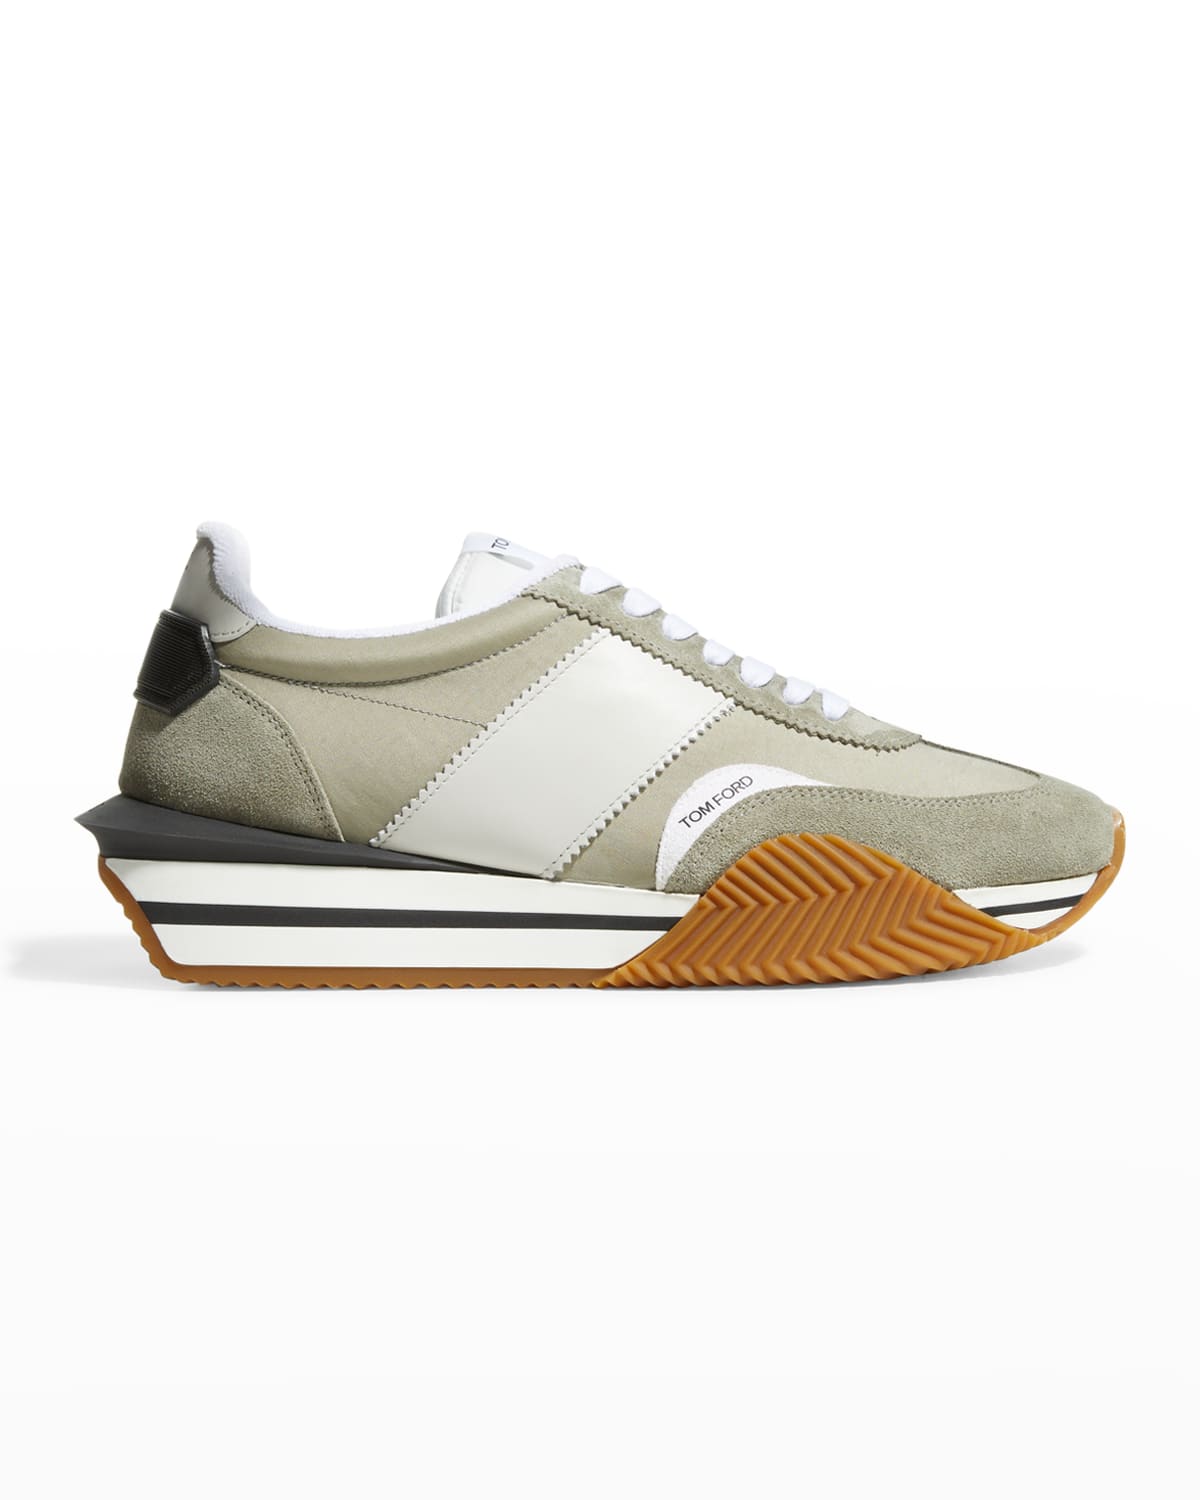 Tom Ford Low Top Sneakers | Neiman Marcus